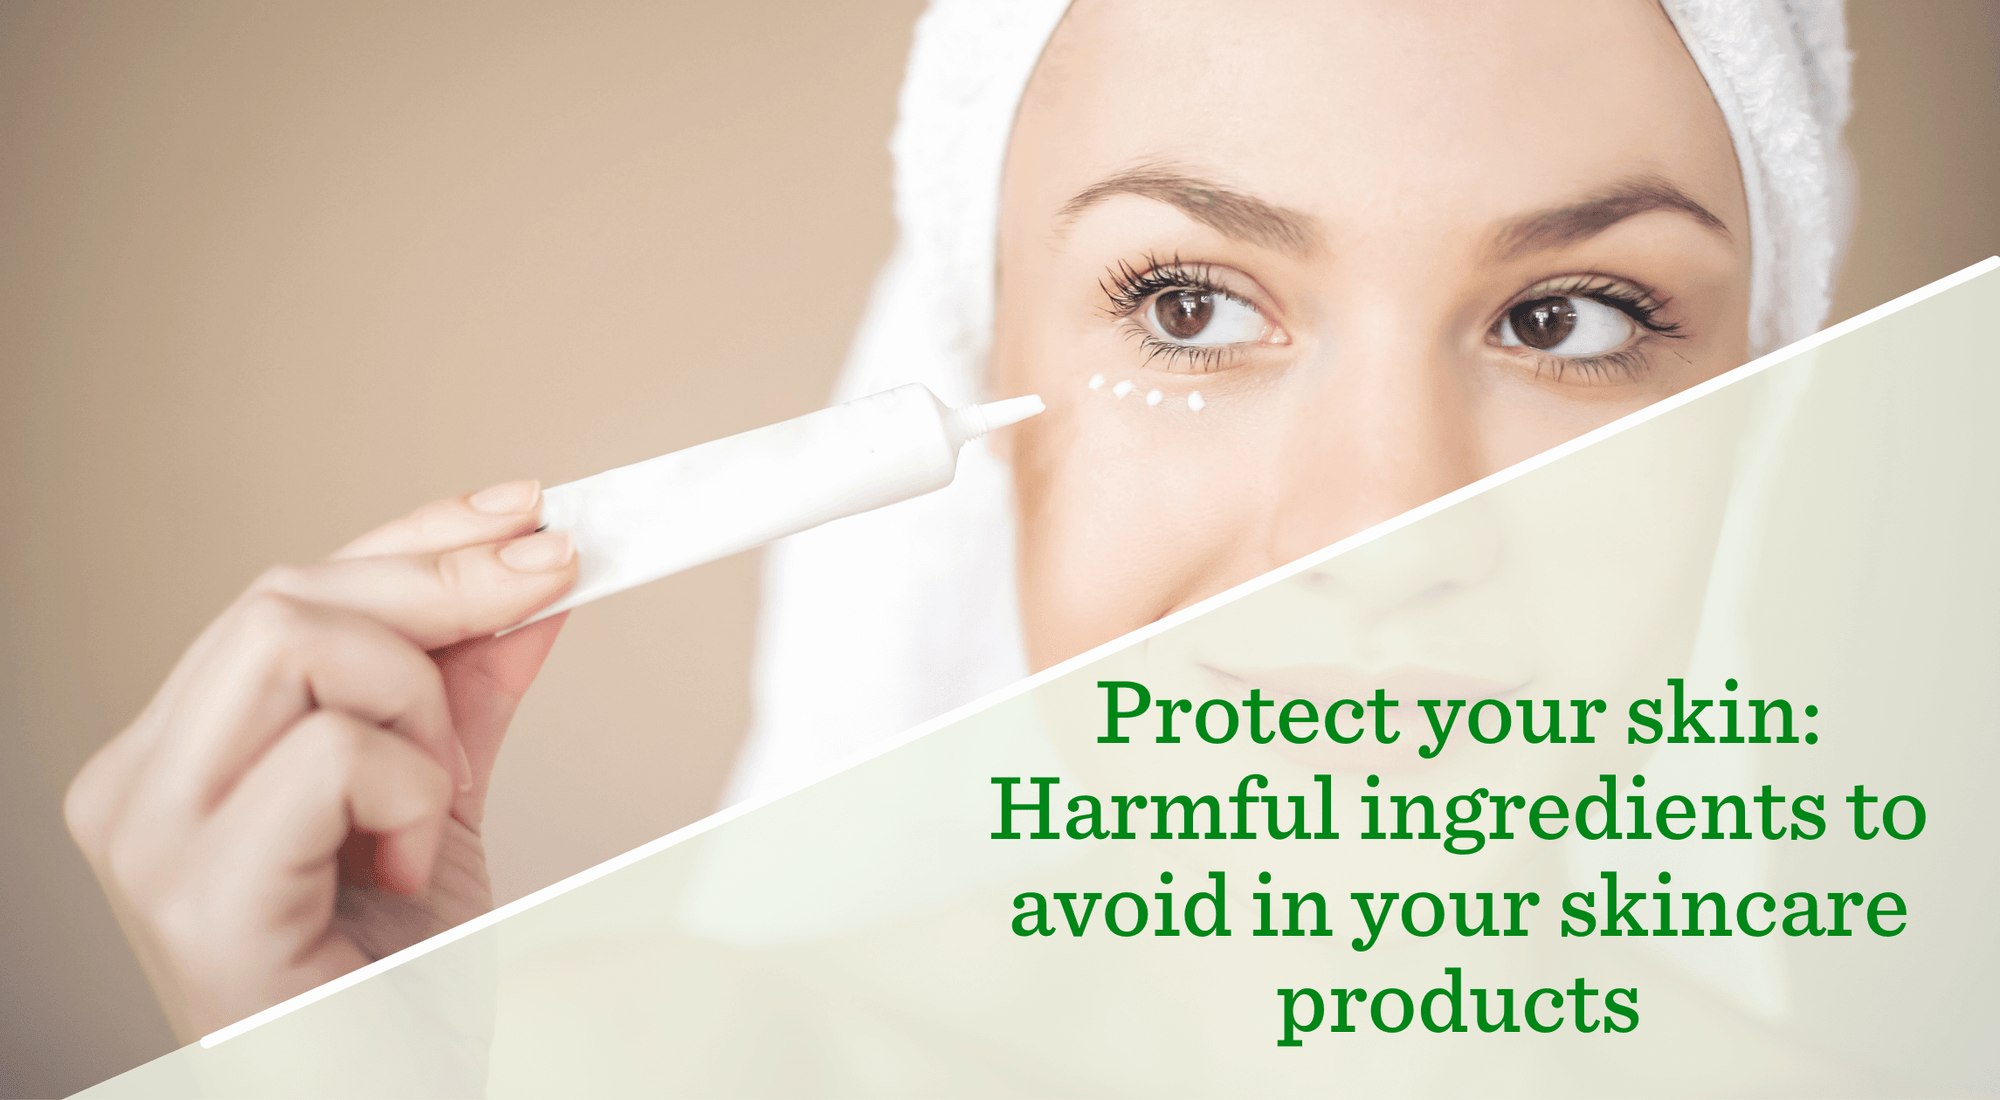 Harmful ingredients to avoid in your skincare products